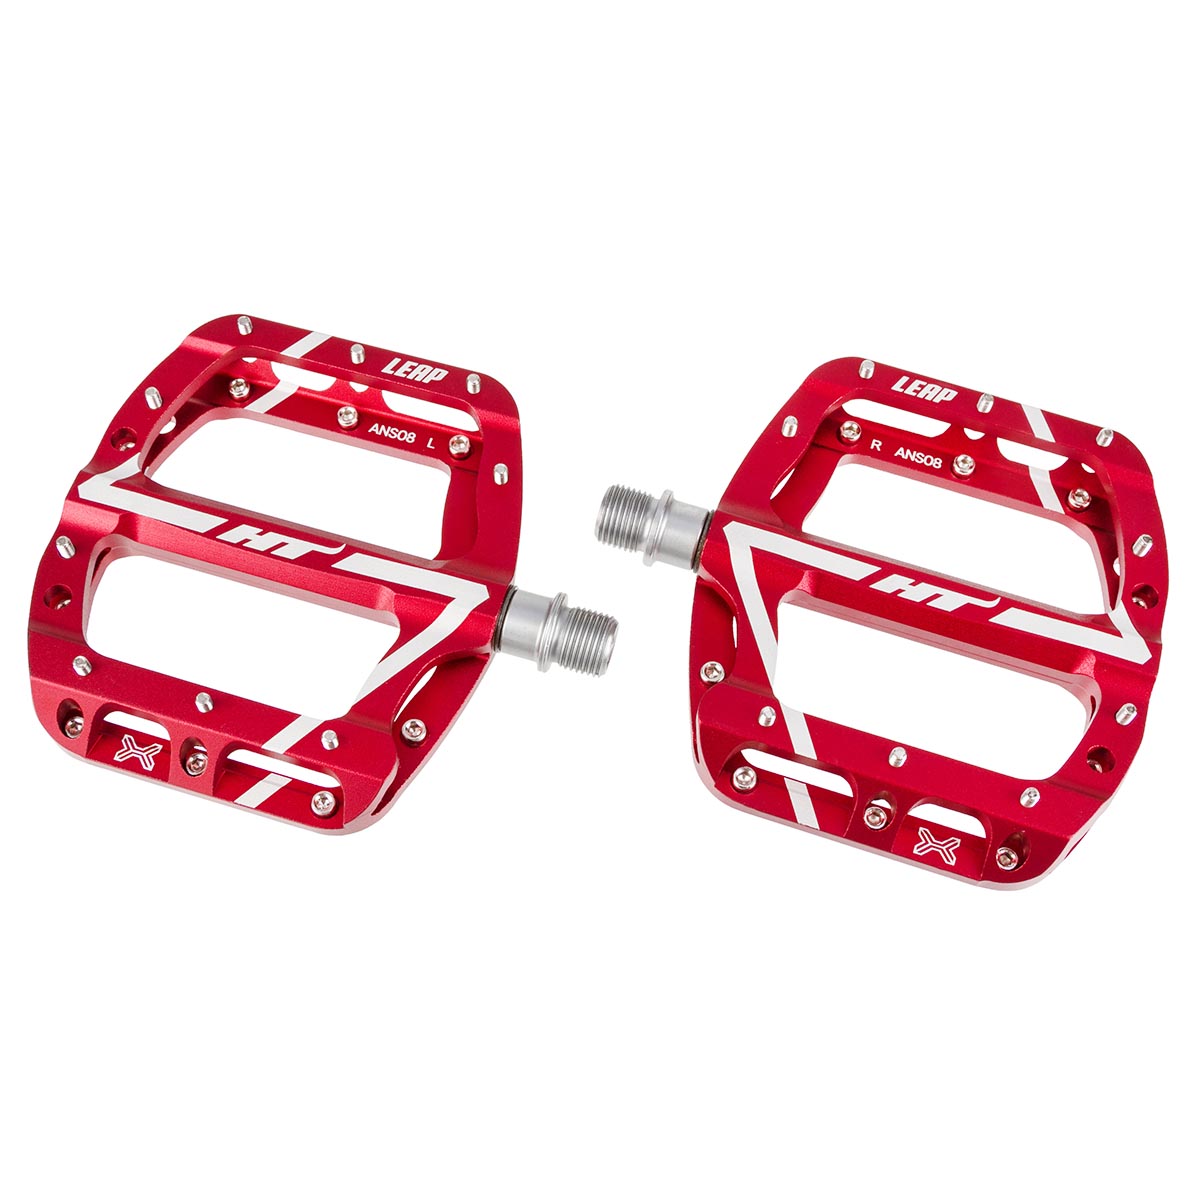 HT Components Pedals ANS08 Leap Red